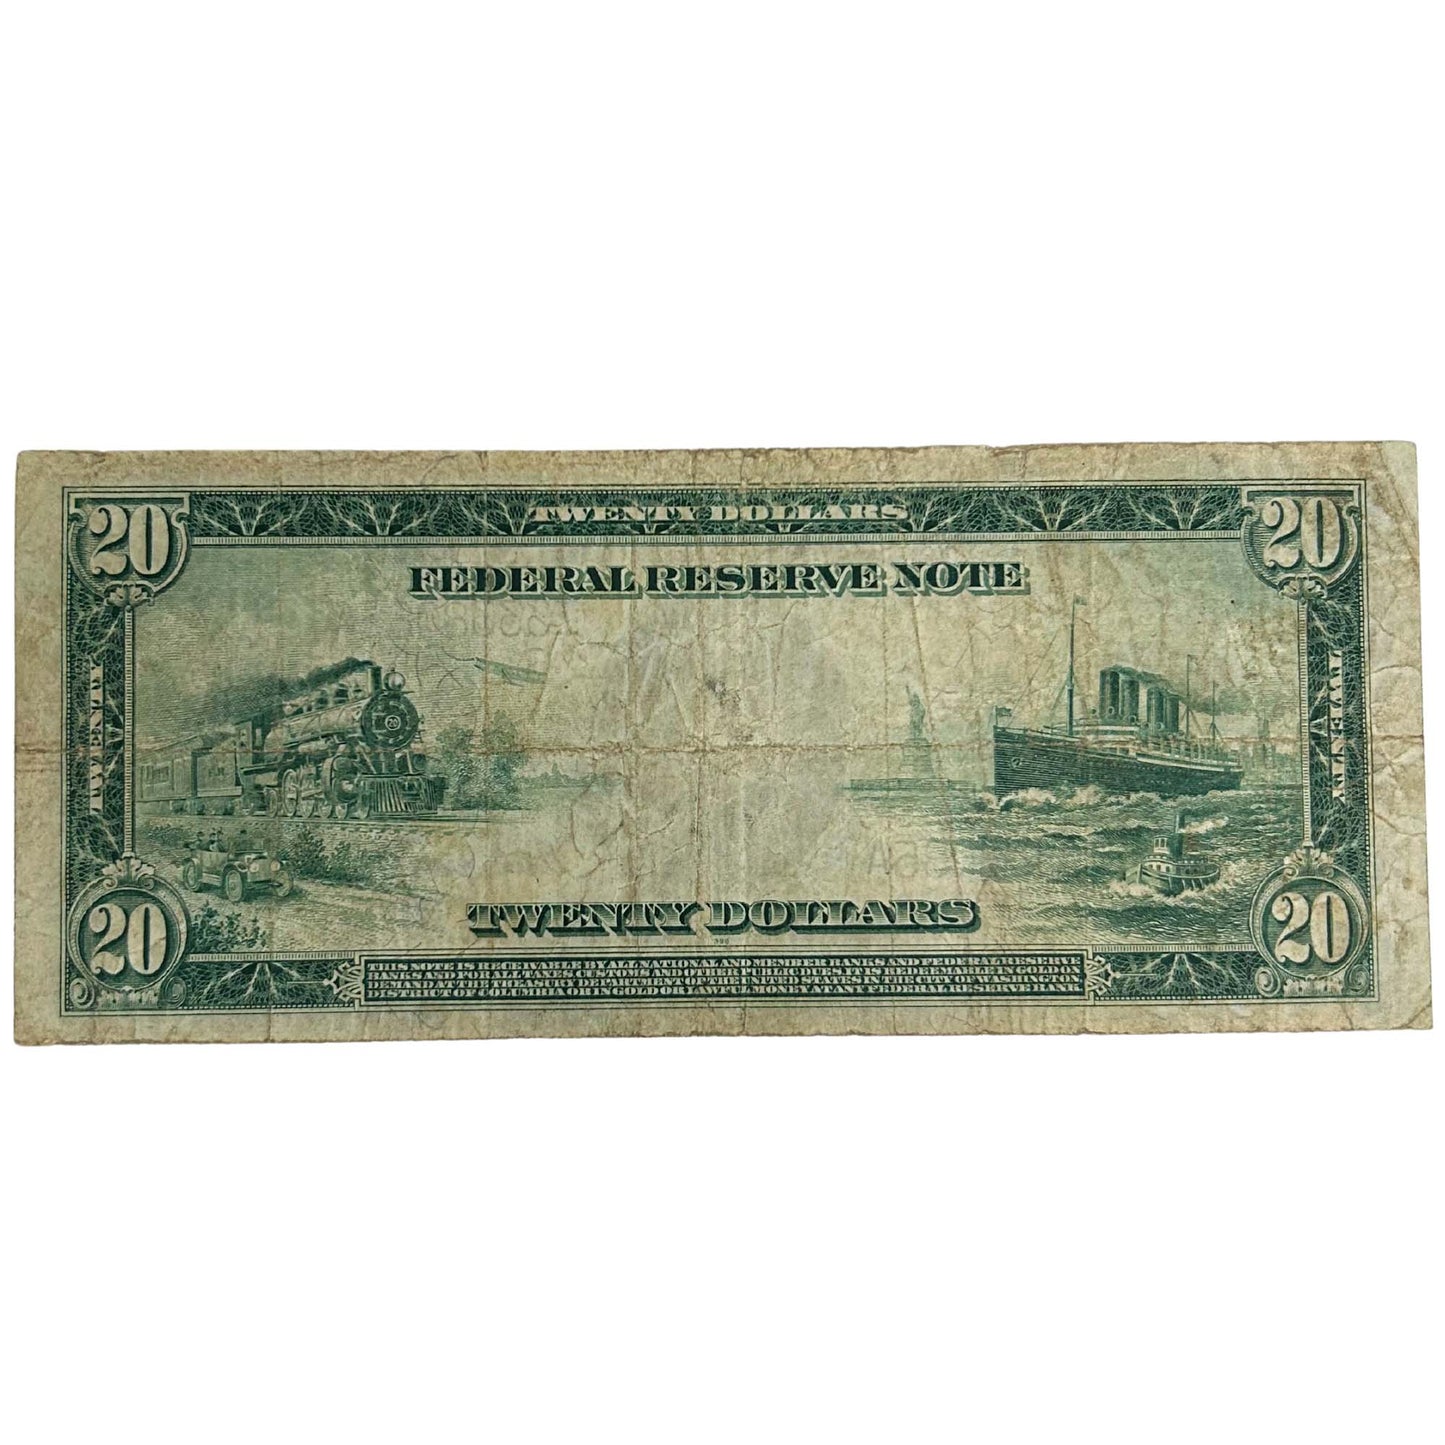 1914 Washington D.C. $20 Currency Note Back